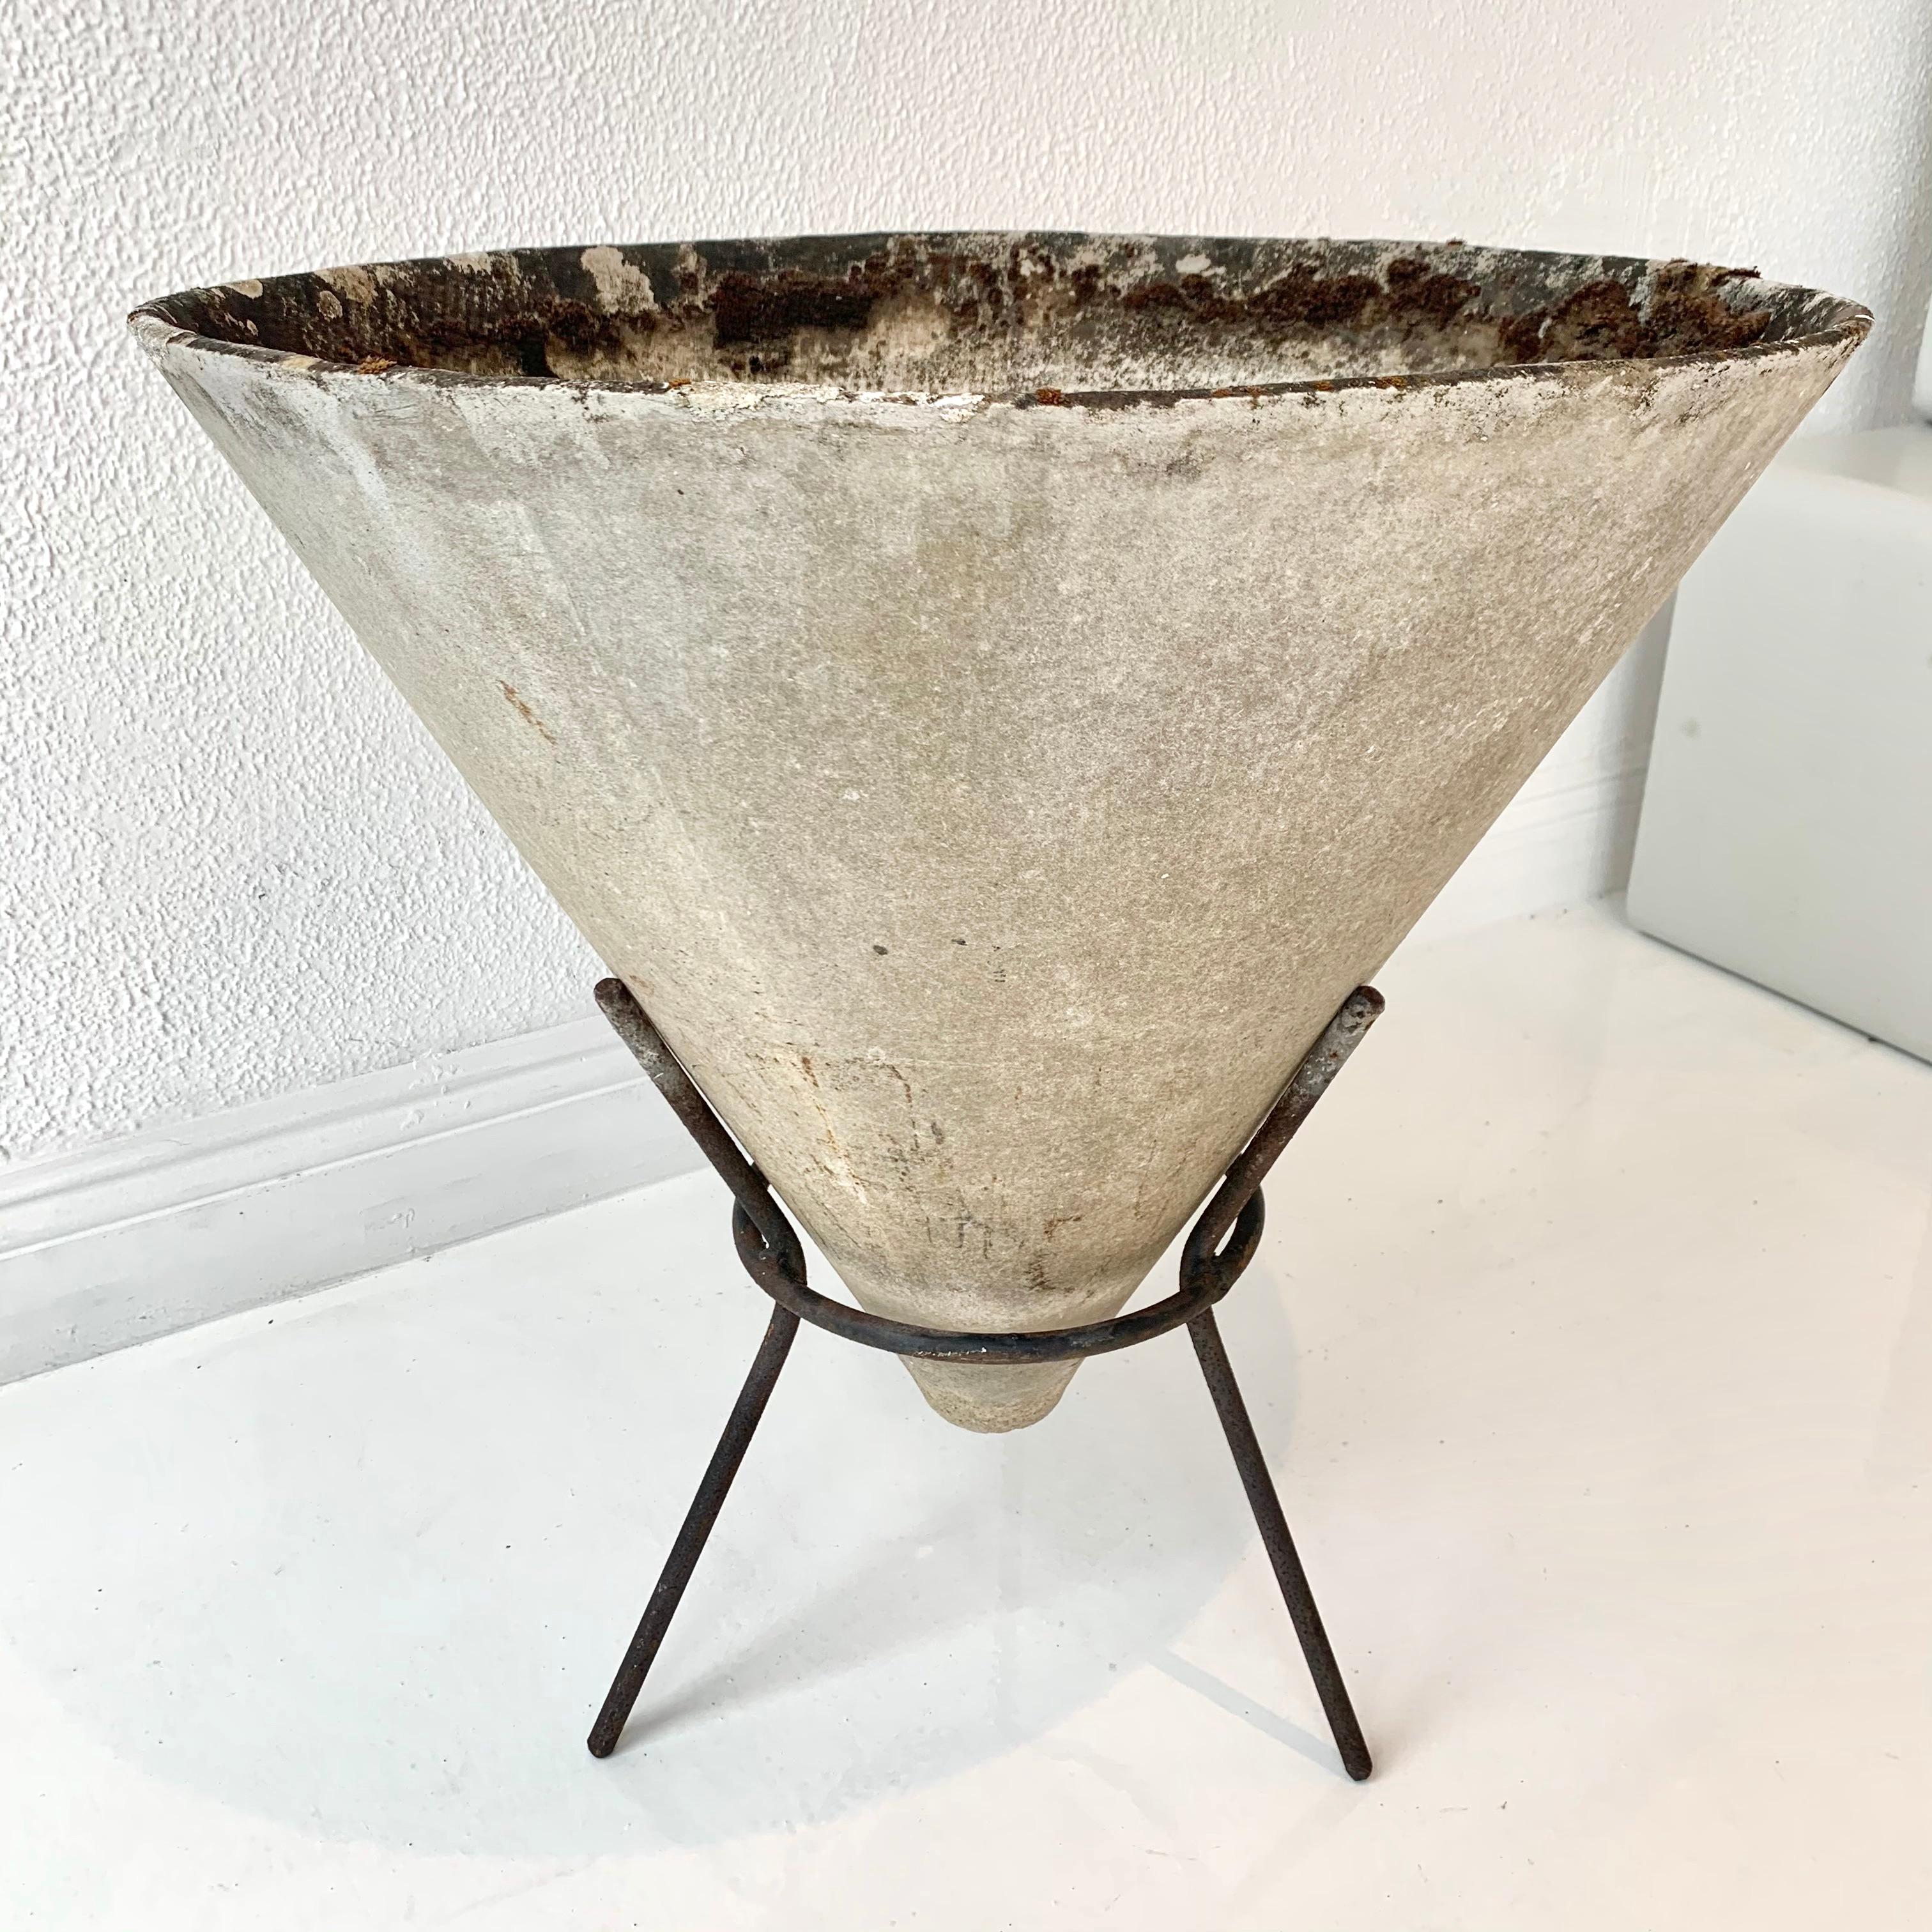 Unusual set of 5 concrete cone planters by Will Guhl. Made in the 1960s, in Switzerland. Inverted concrete cone sits comfortably in an iron tripod stand. Great patina and coloring to each planter. Bottom of cone floats a few inches off of the